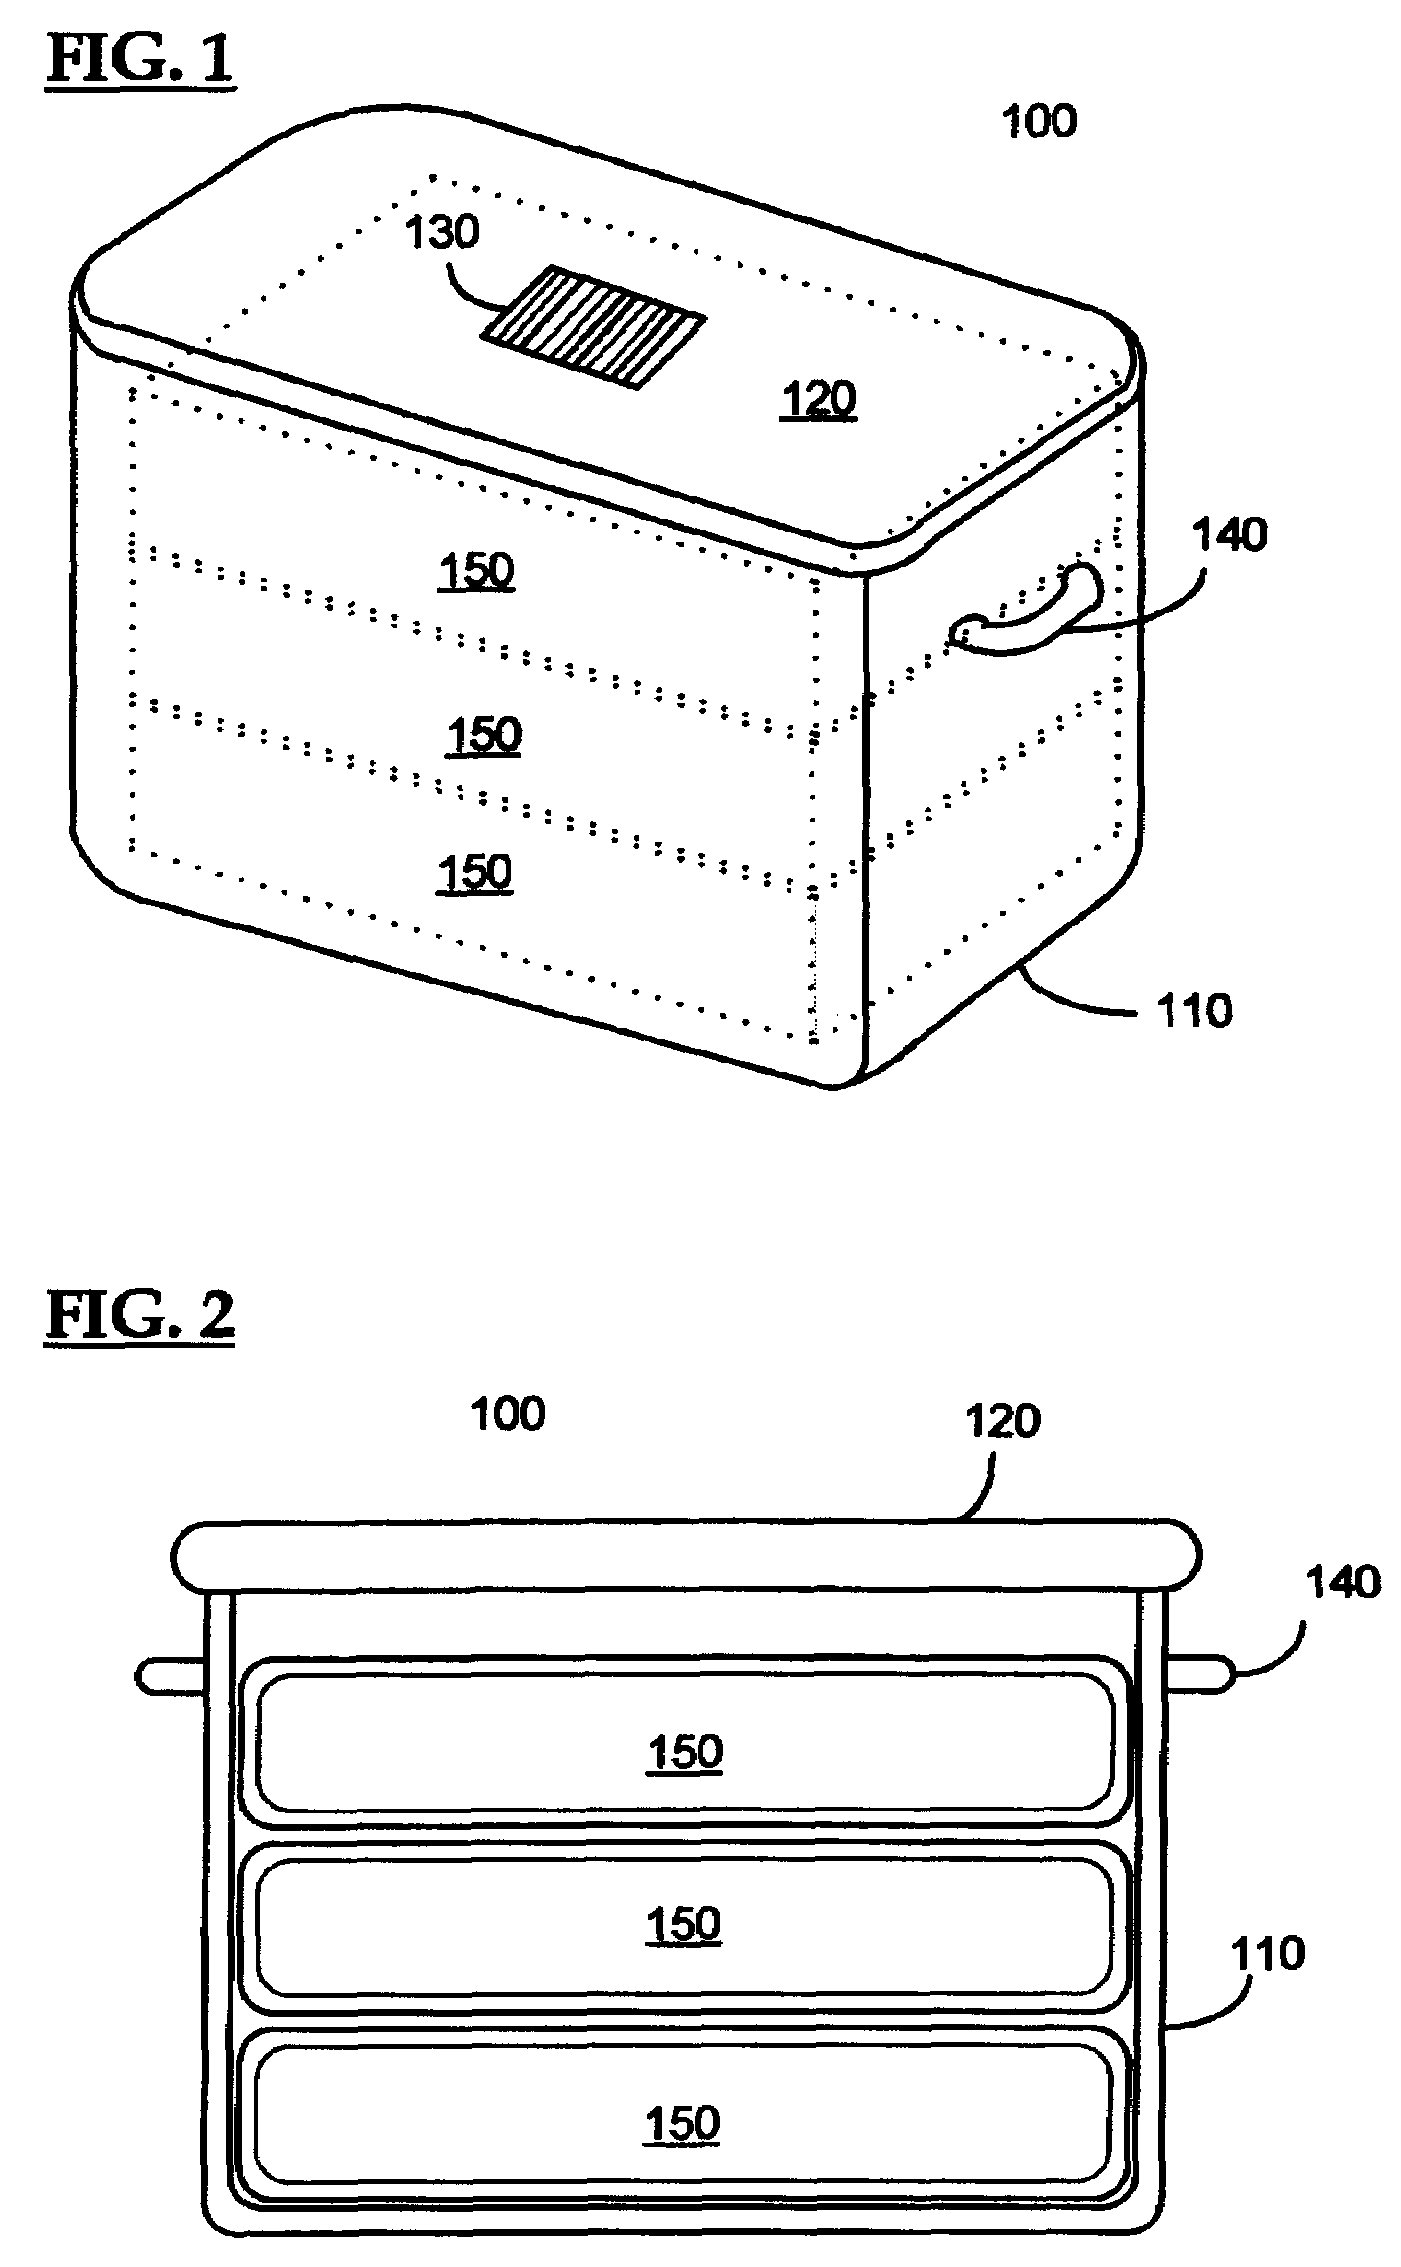 Control system for an RFID-based system for assembling and verifying outbound surgical equipment corresponding to a particular surgery